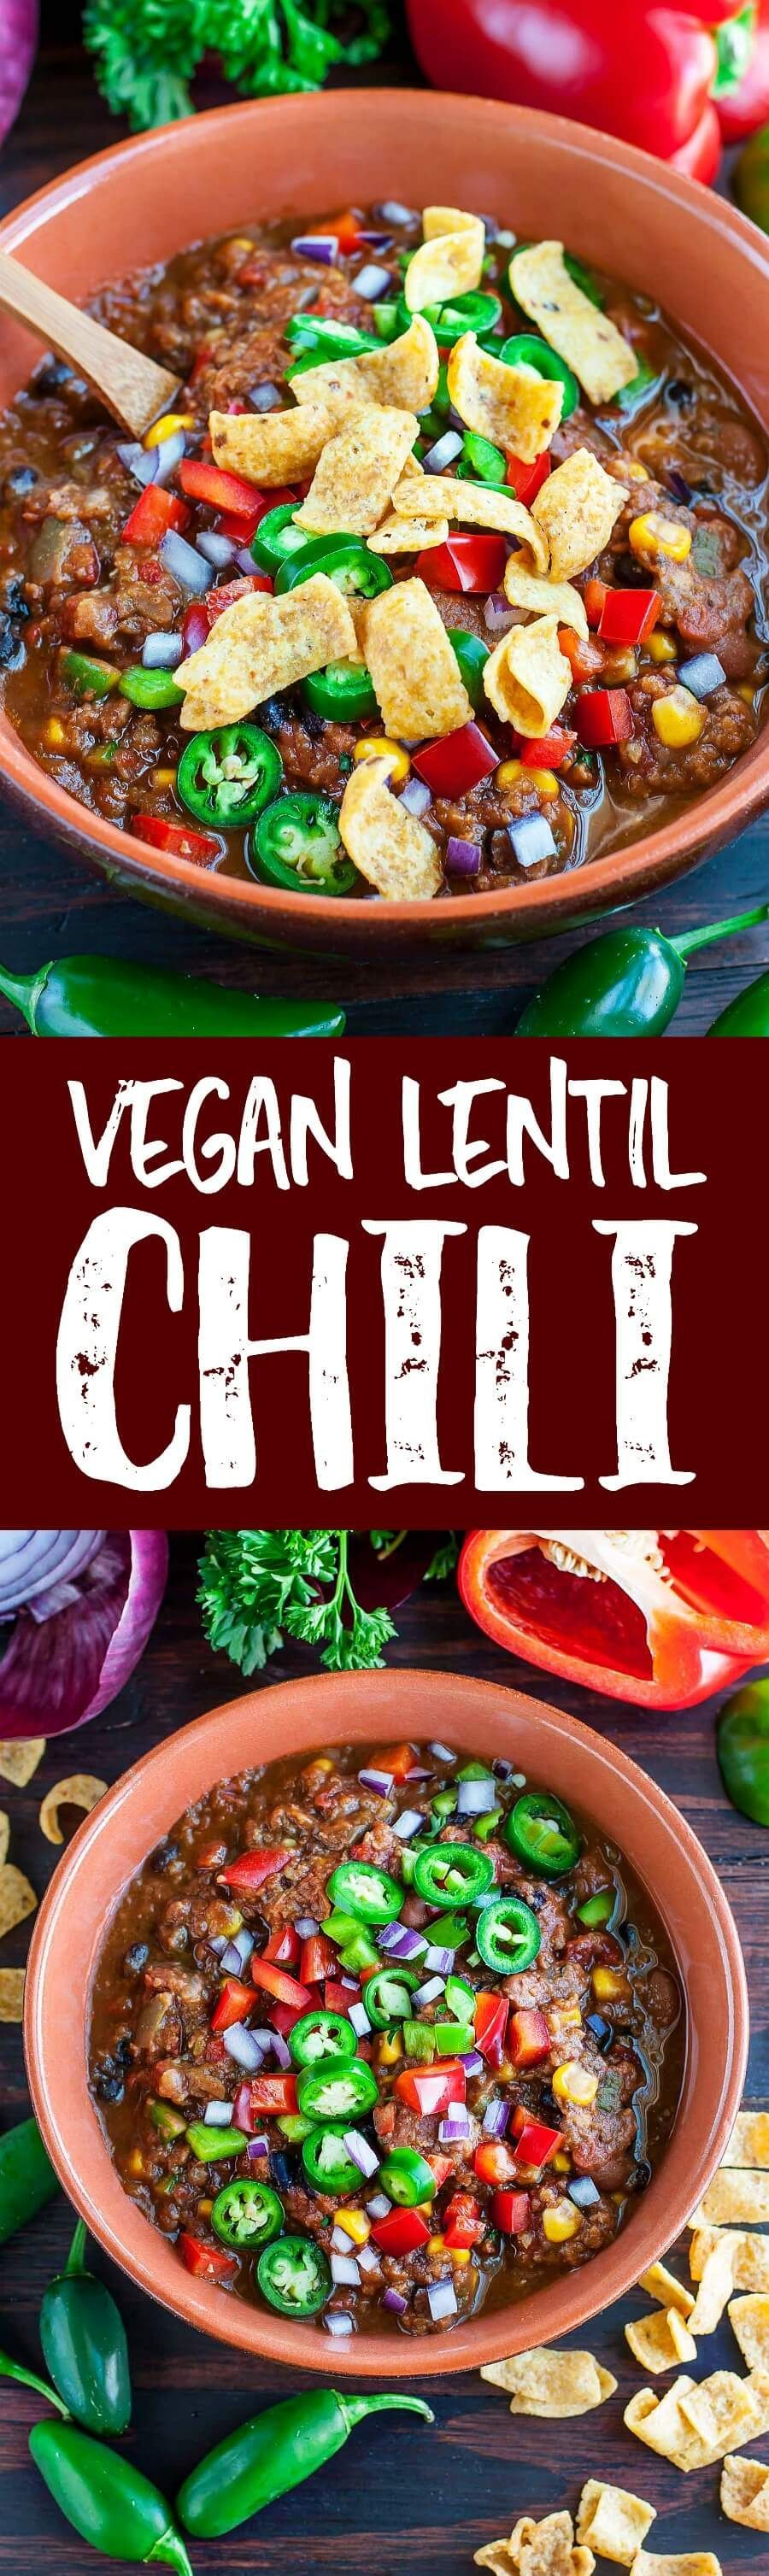 This tasty vegan lentil chili is sure to impress! With stove-top, pressure cooker,